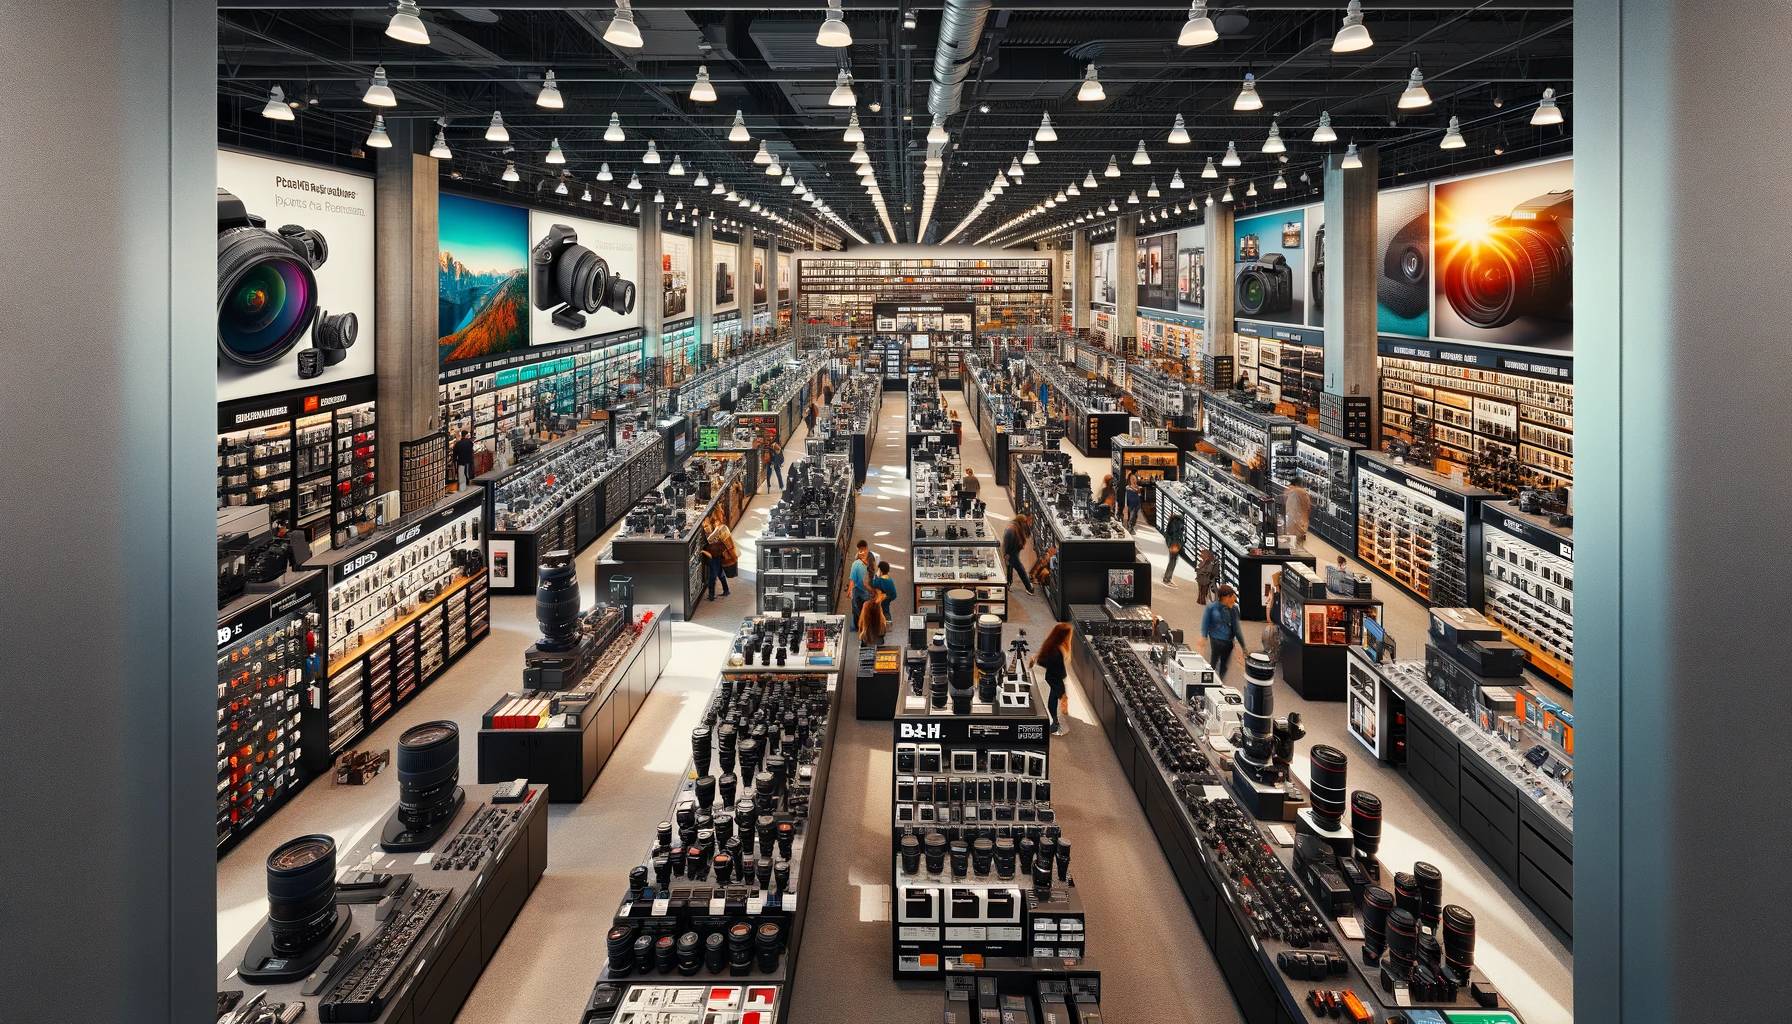 B&H store imagined in New York